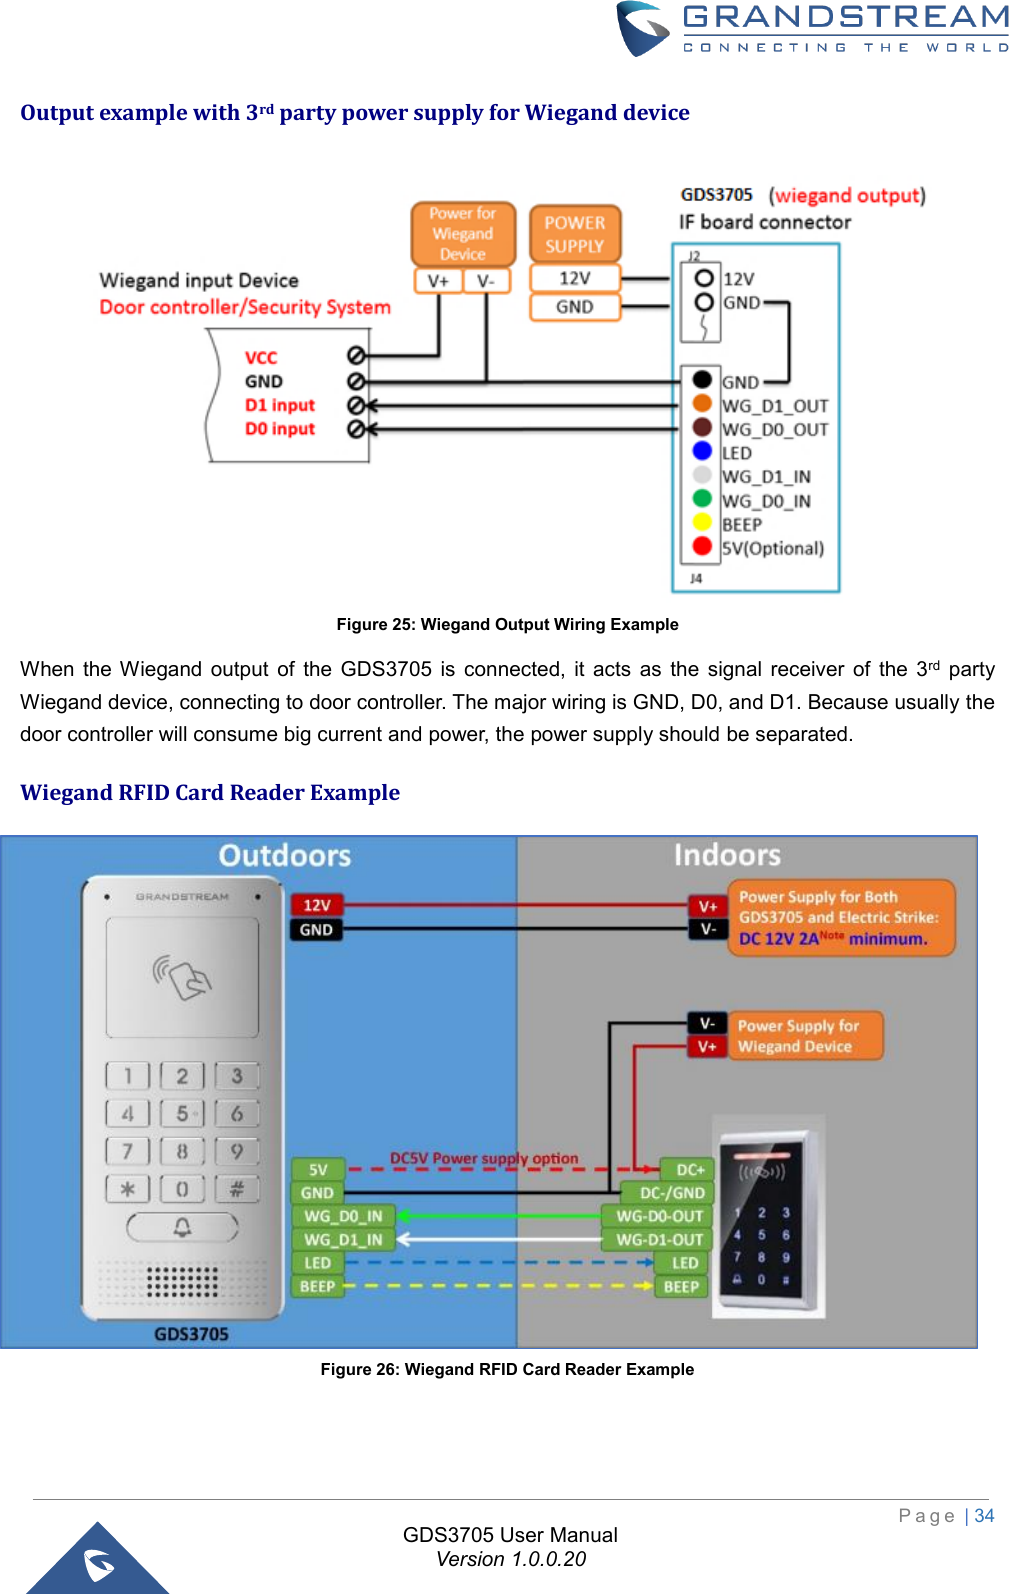                                                                         P a g e  | 34  GDS3705 User Manual Version 1.0.0.20 Output example with 3rd party power supply for Wiegand device  Figure 25: Wiegand Output Wiring Example When the  Wiegand  output  of  the  GDS3705  is  connected,  it  acts  as  the  signal  receiver  of  the  3rd  party Wiegand device, connecting to door controller. The major wiring is GND, D0, and D1. Because usually the door controller will consume big current and power, the power supply should be separated. Wiegand RFID Card Reader Example  Figure 26: Wiegand RFID Card Reader Example 